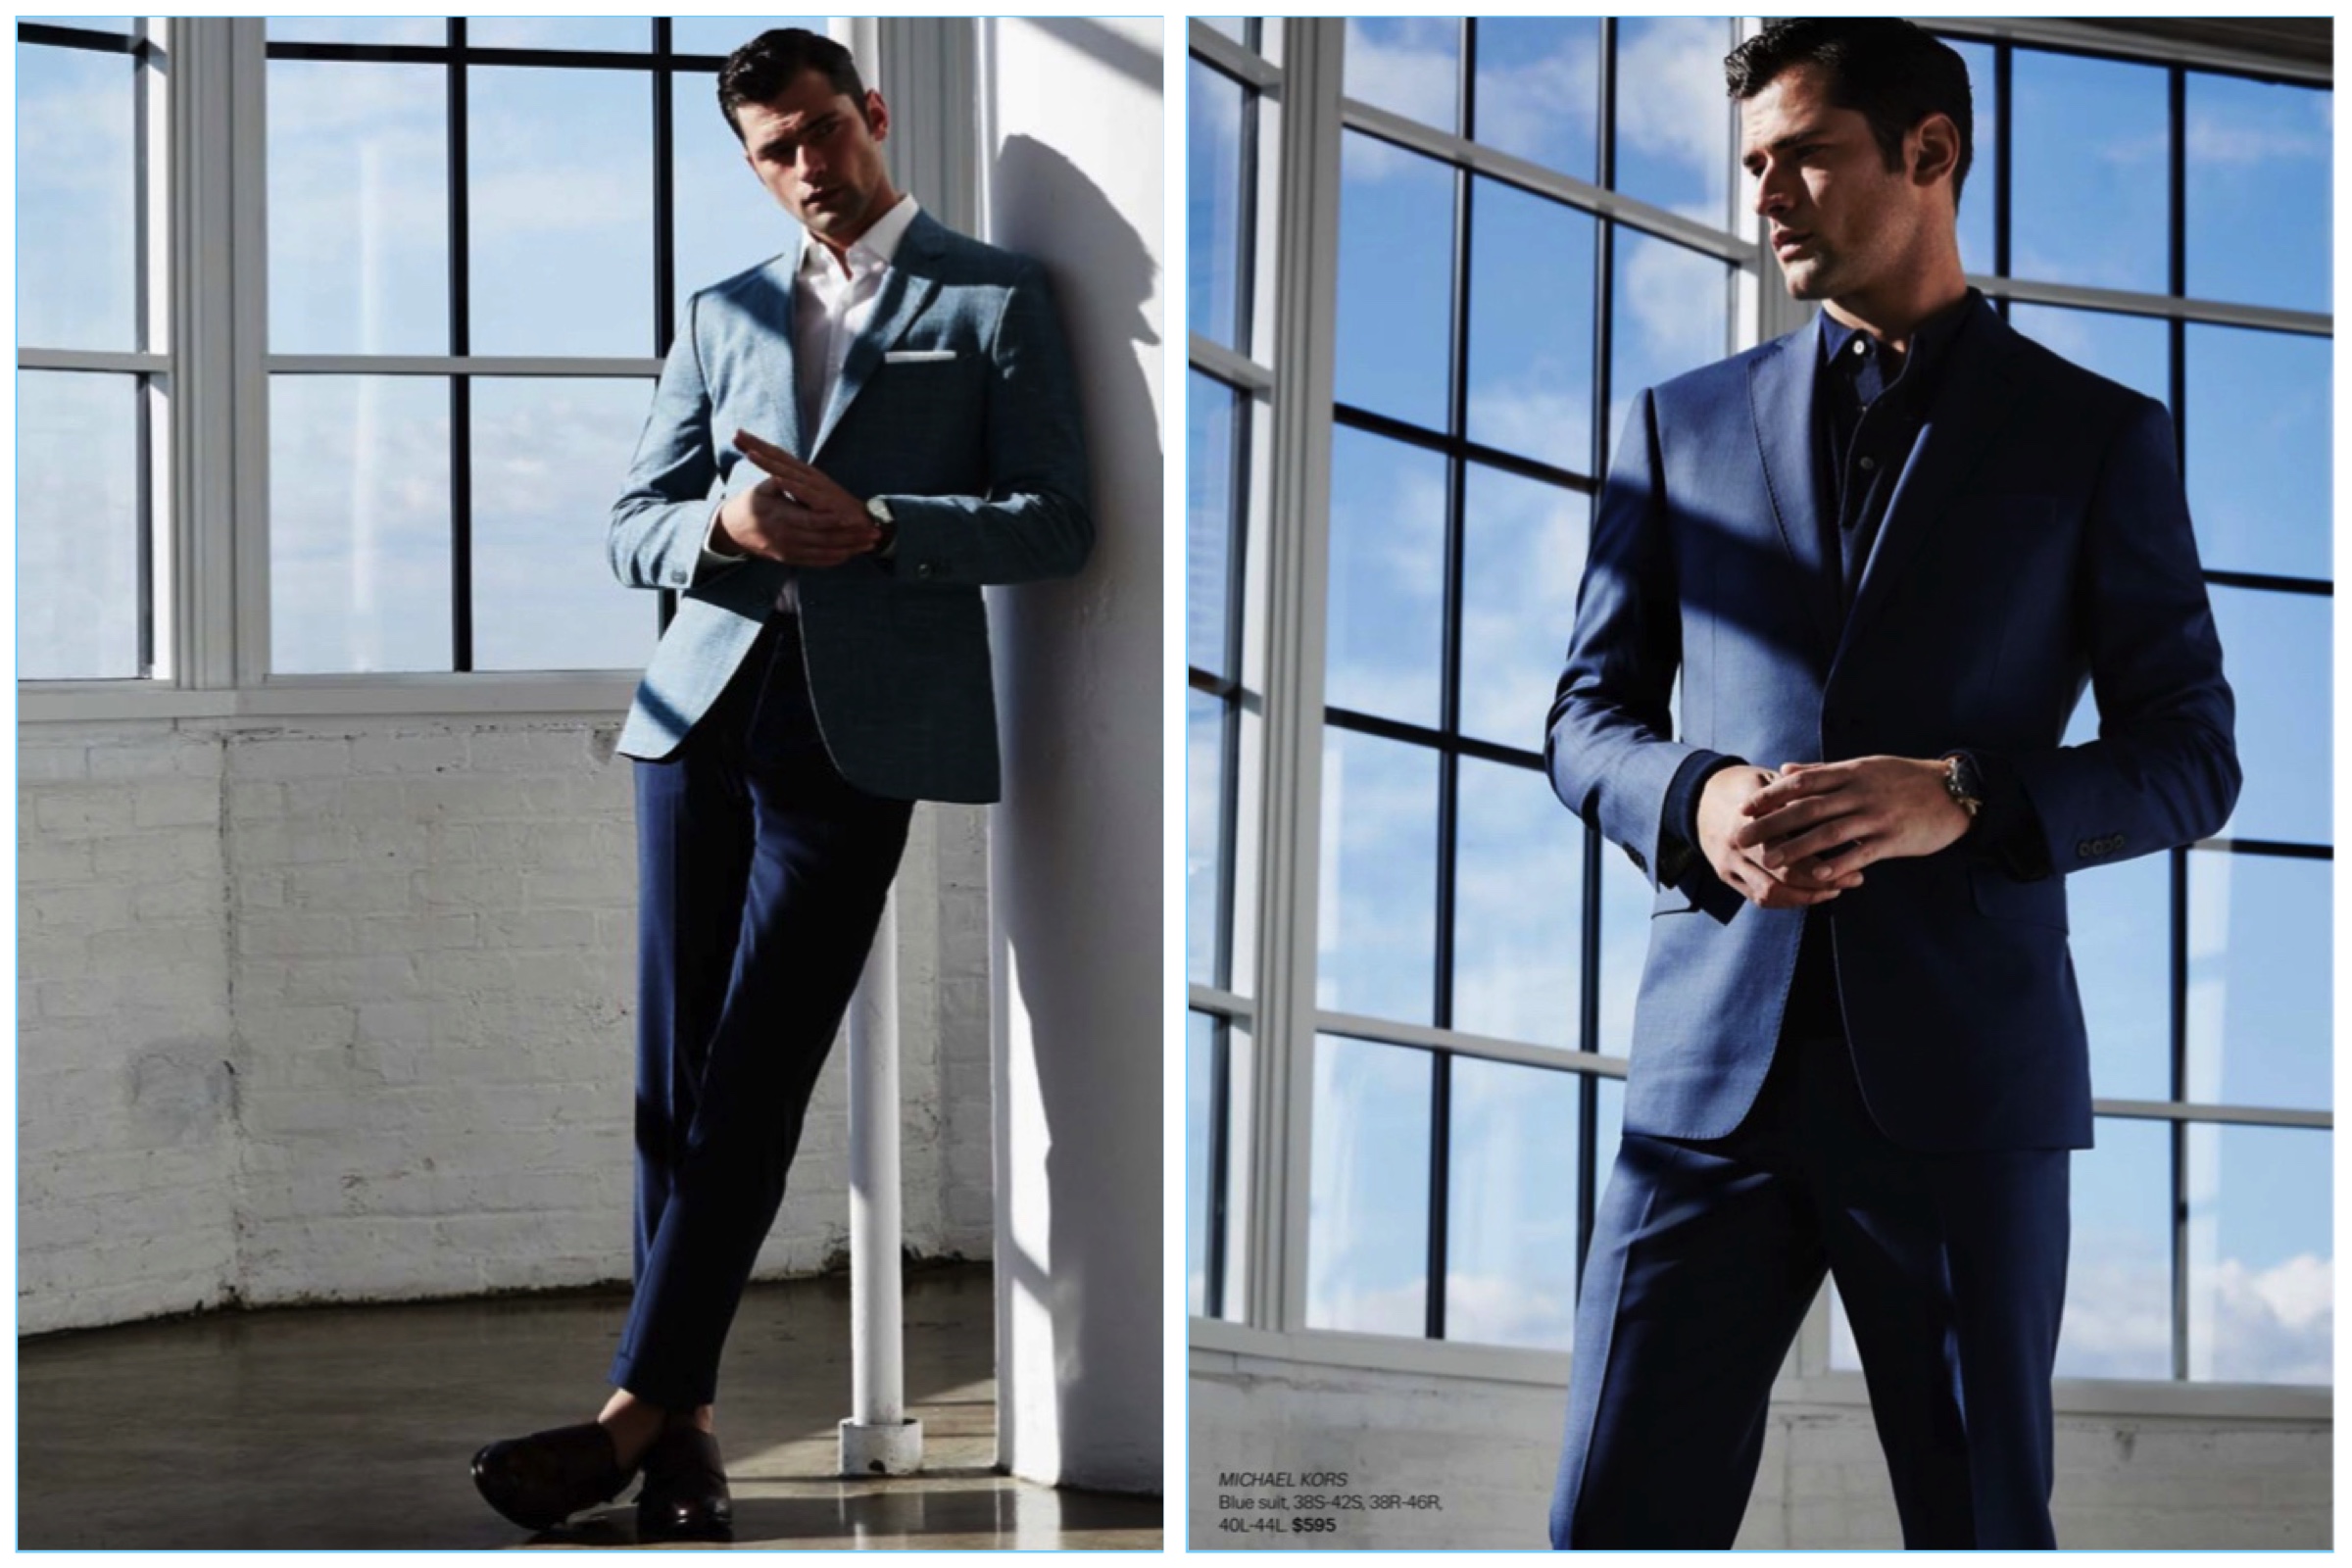 Well-Suited: Sean O'Pry Suits Up for Lord & Taylor – The Fashionisto